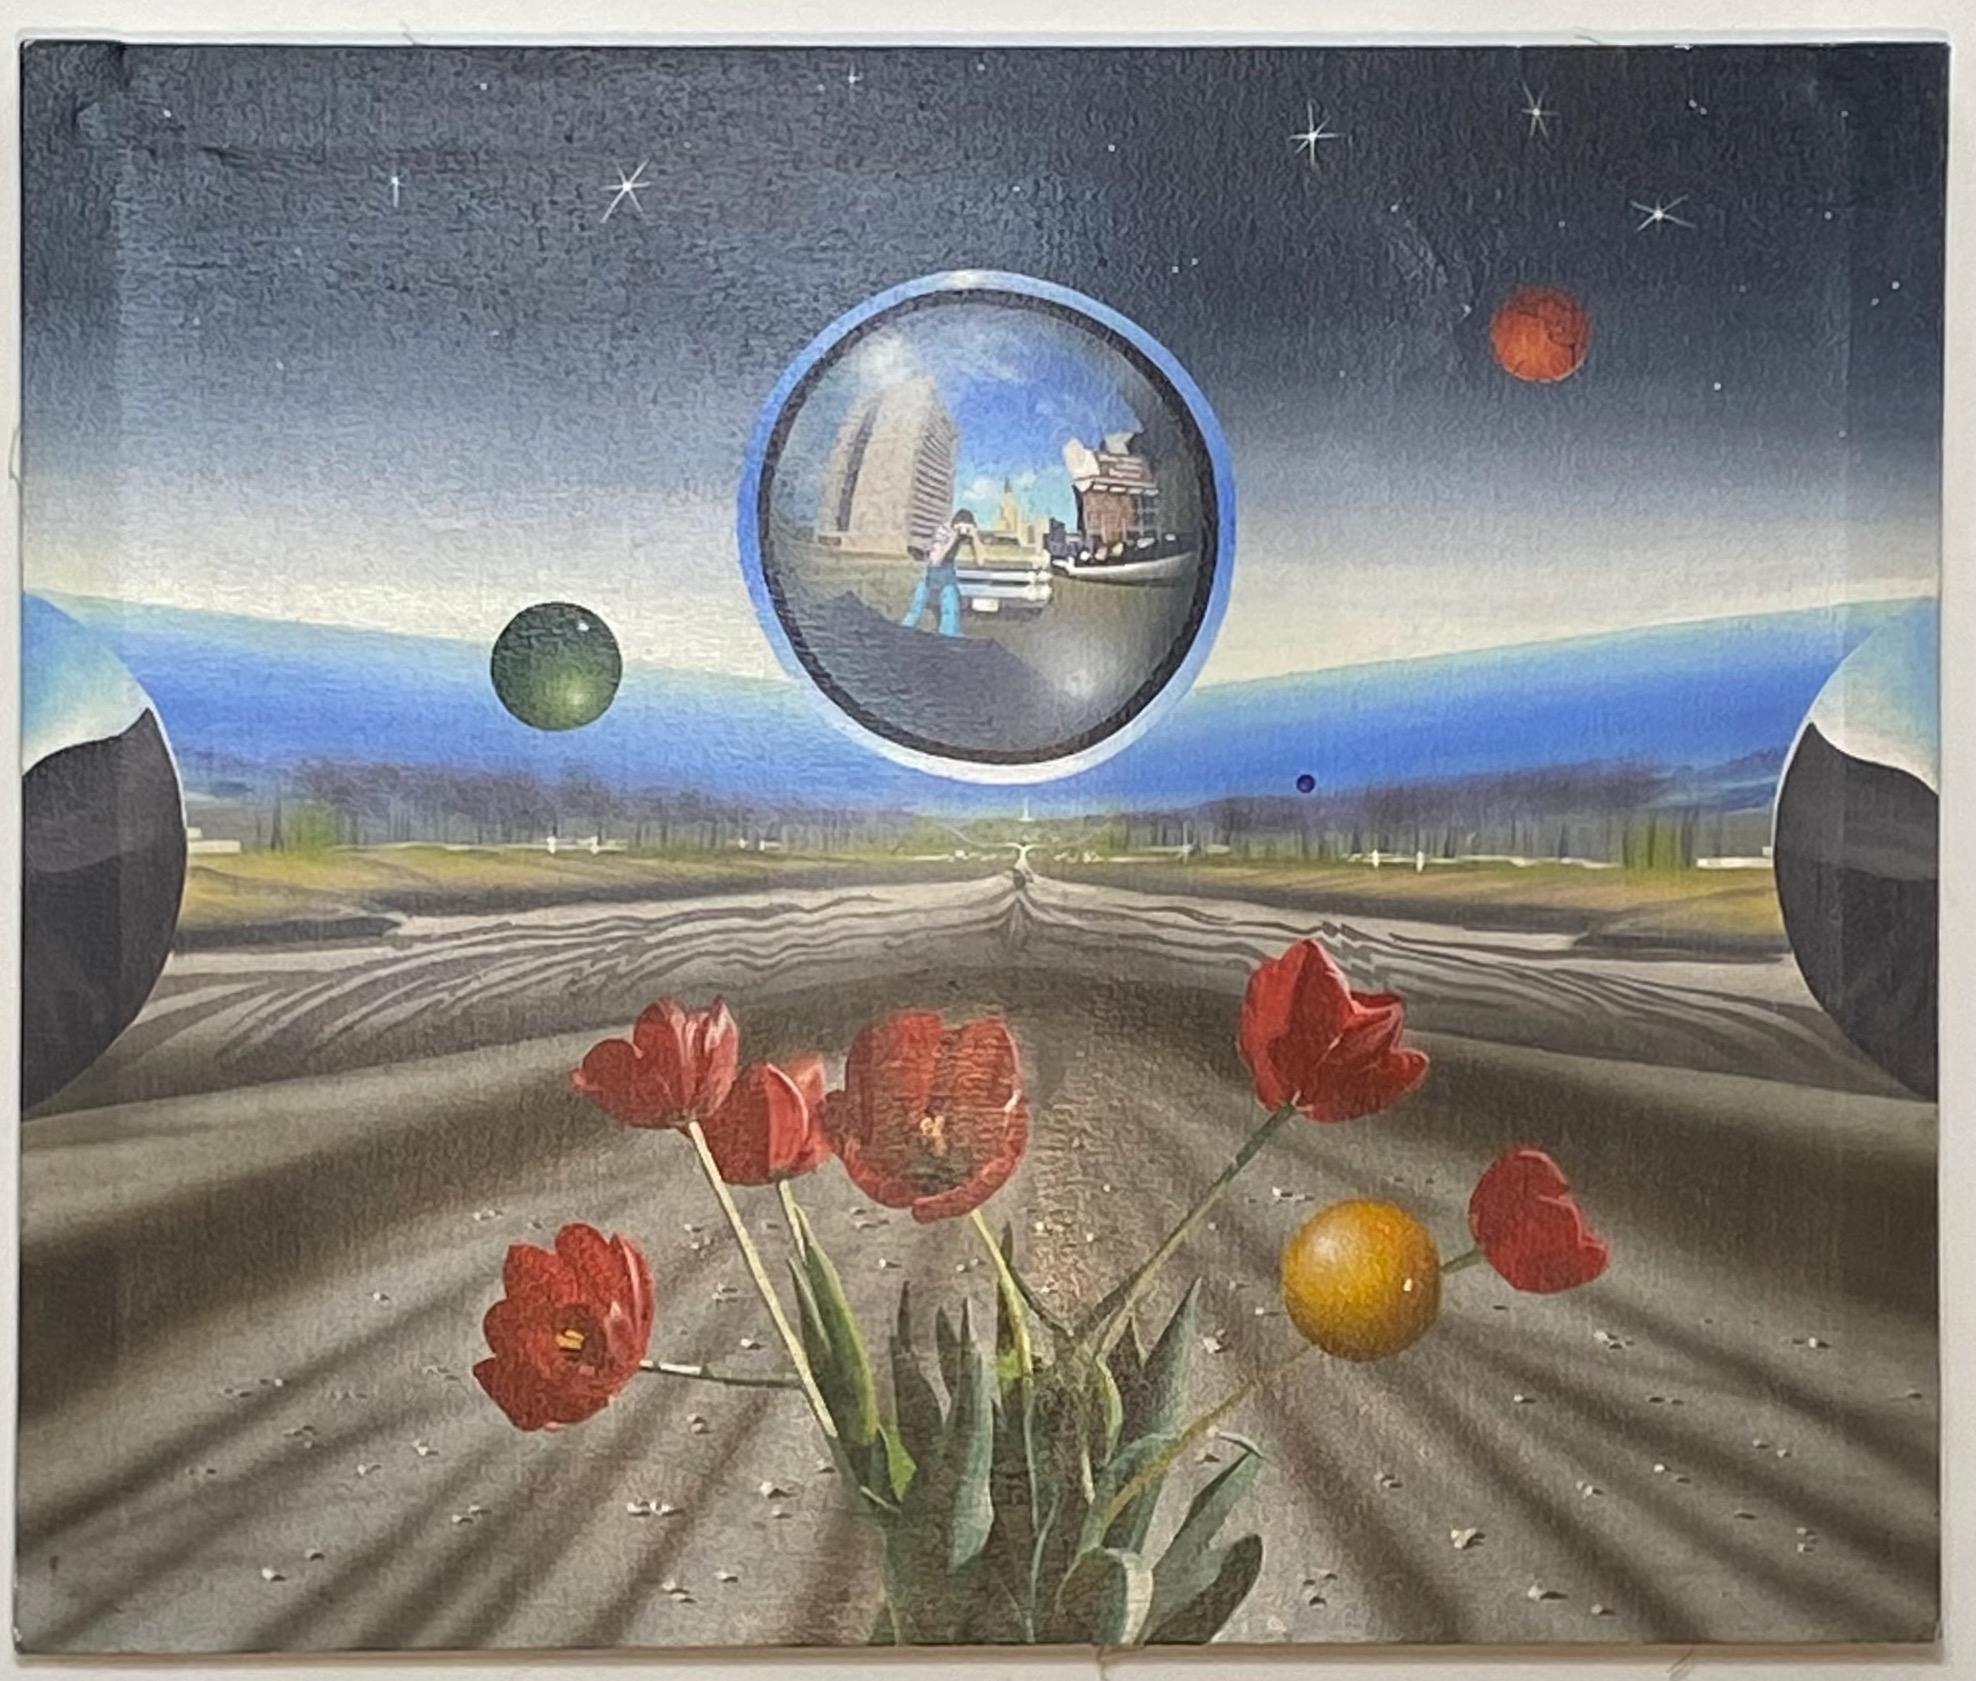 A large interesting dream-like surrealist style painting.
Painting is unframed and unsigned.
Acquired in the Bay Area, California.
Last half 20th century.

   